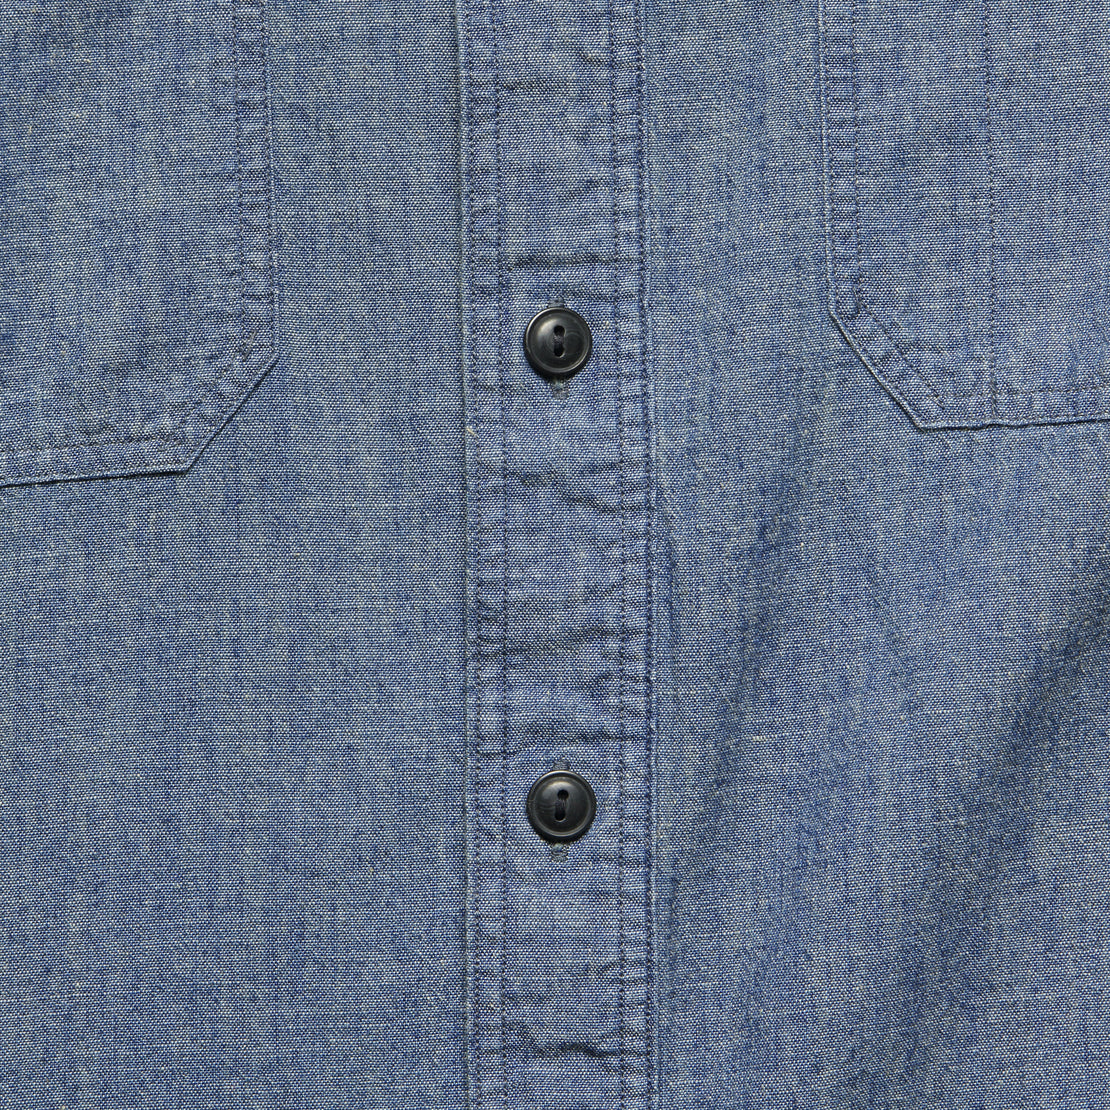 Hudson Workshirt - Chambray - RRL - STAG Provisions - Tops - L/S Woven - Solid